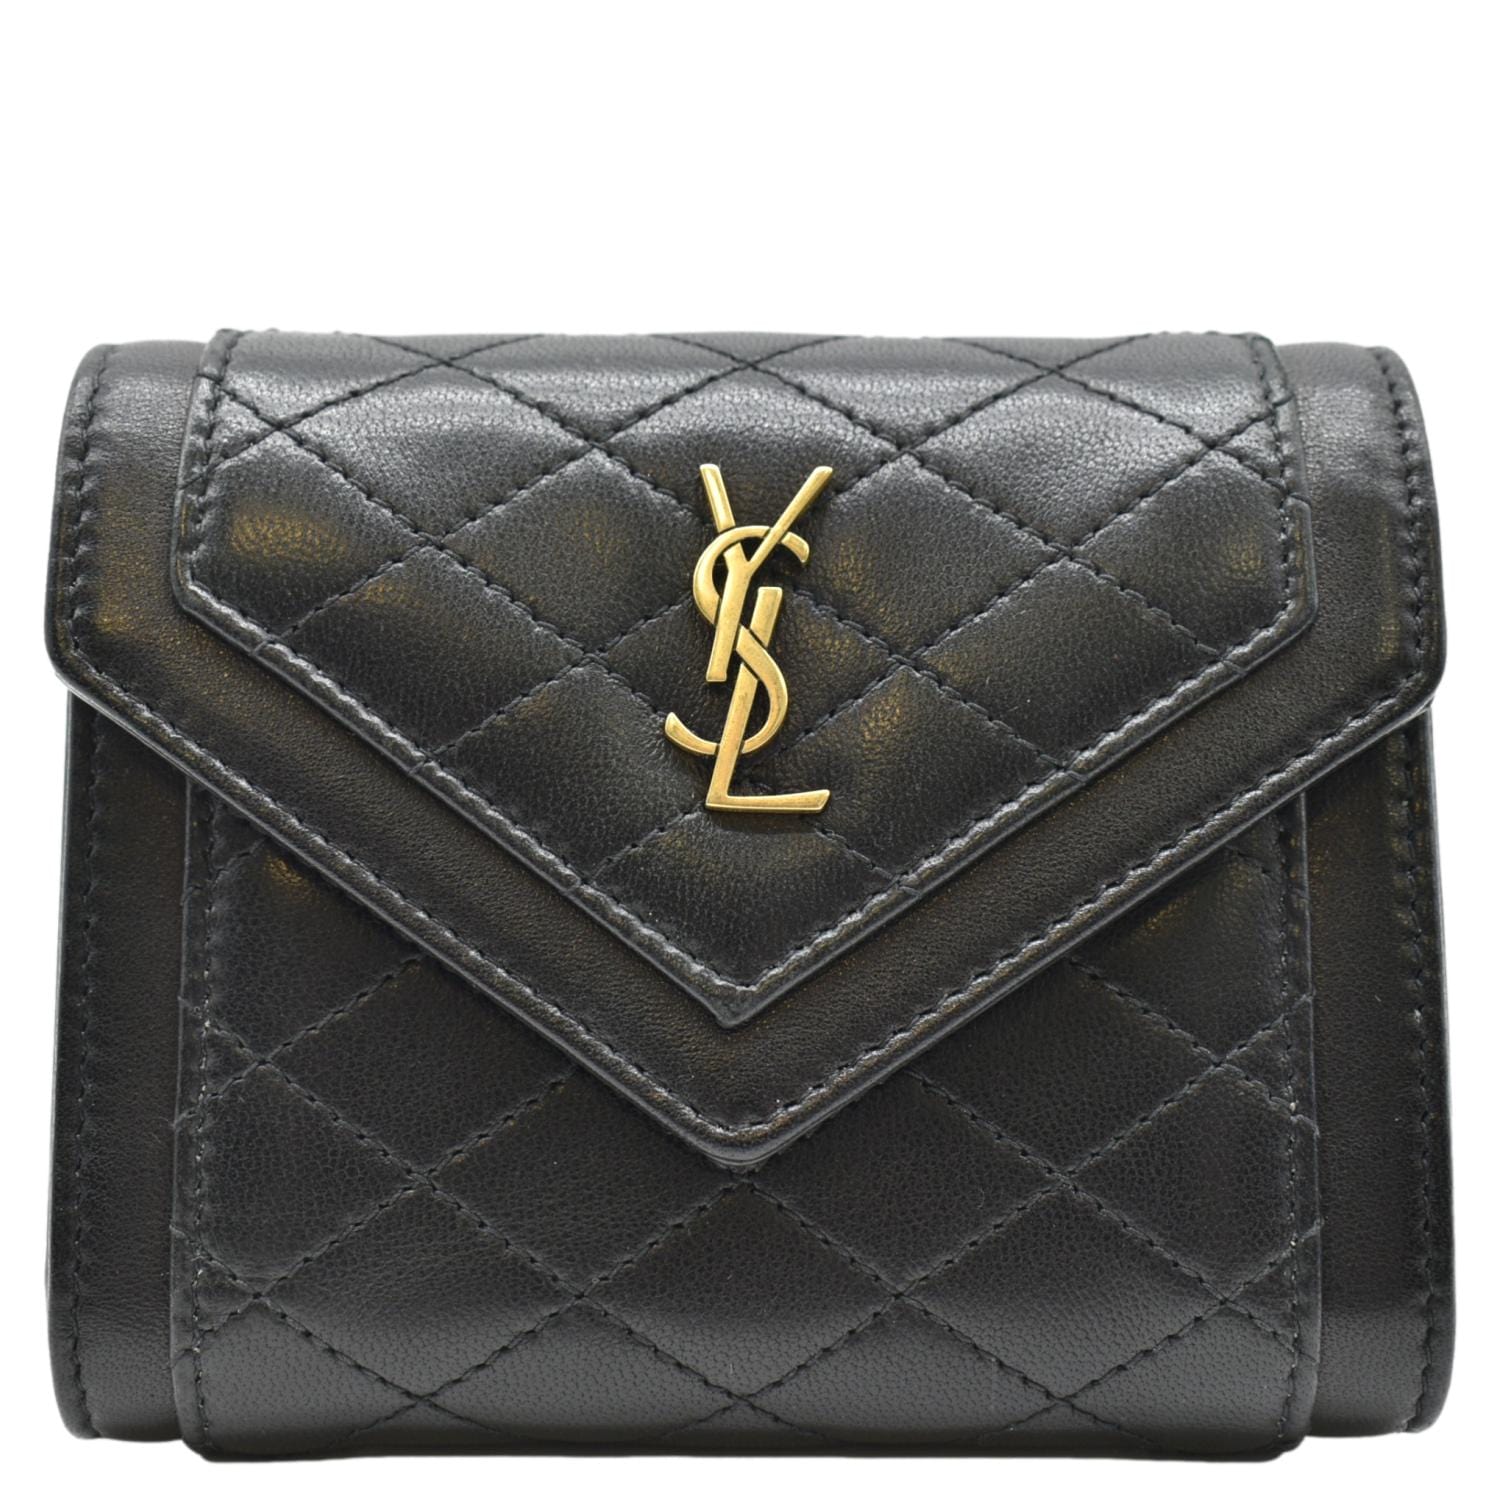 YVES SAINT LAURENT Gaby Compact Tri Fold Small Quilted Leather Wallet